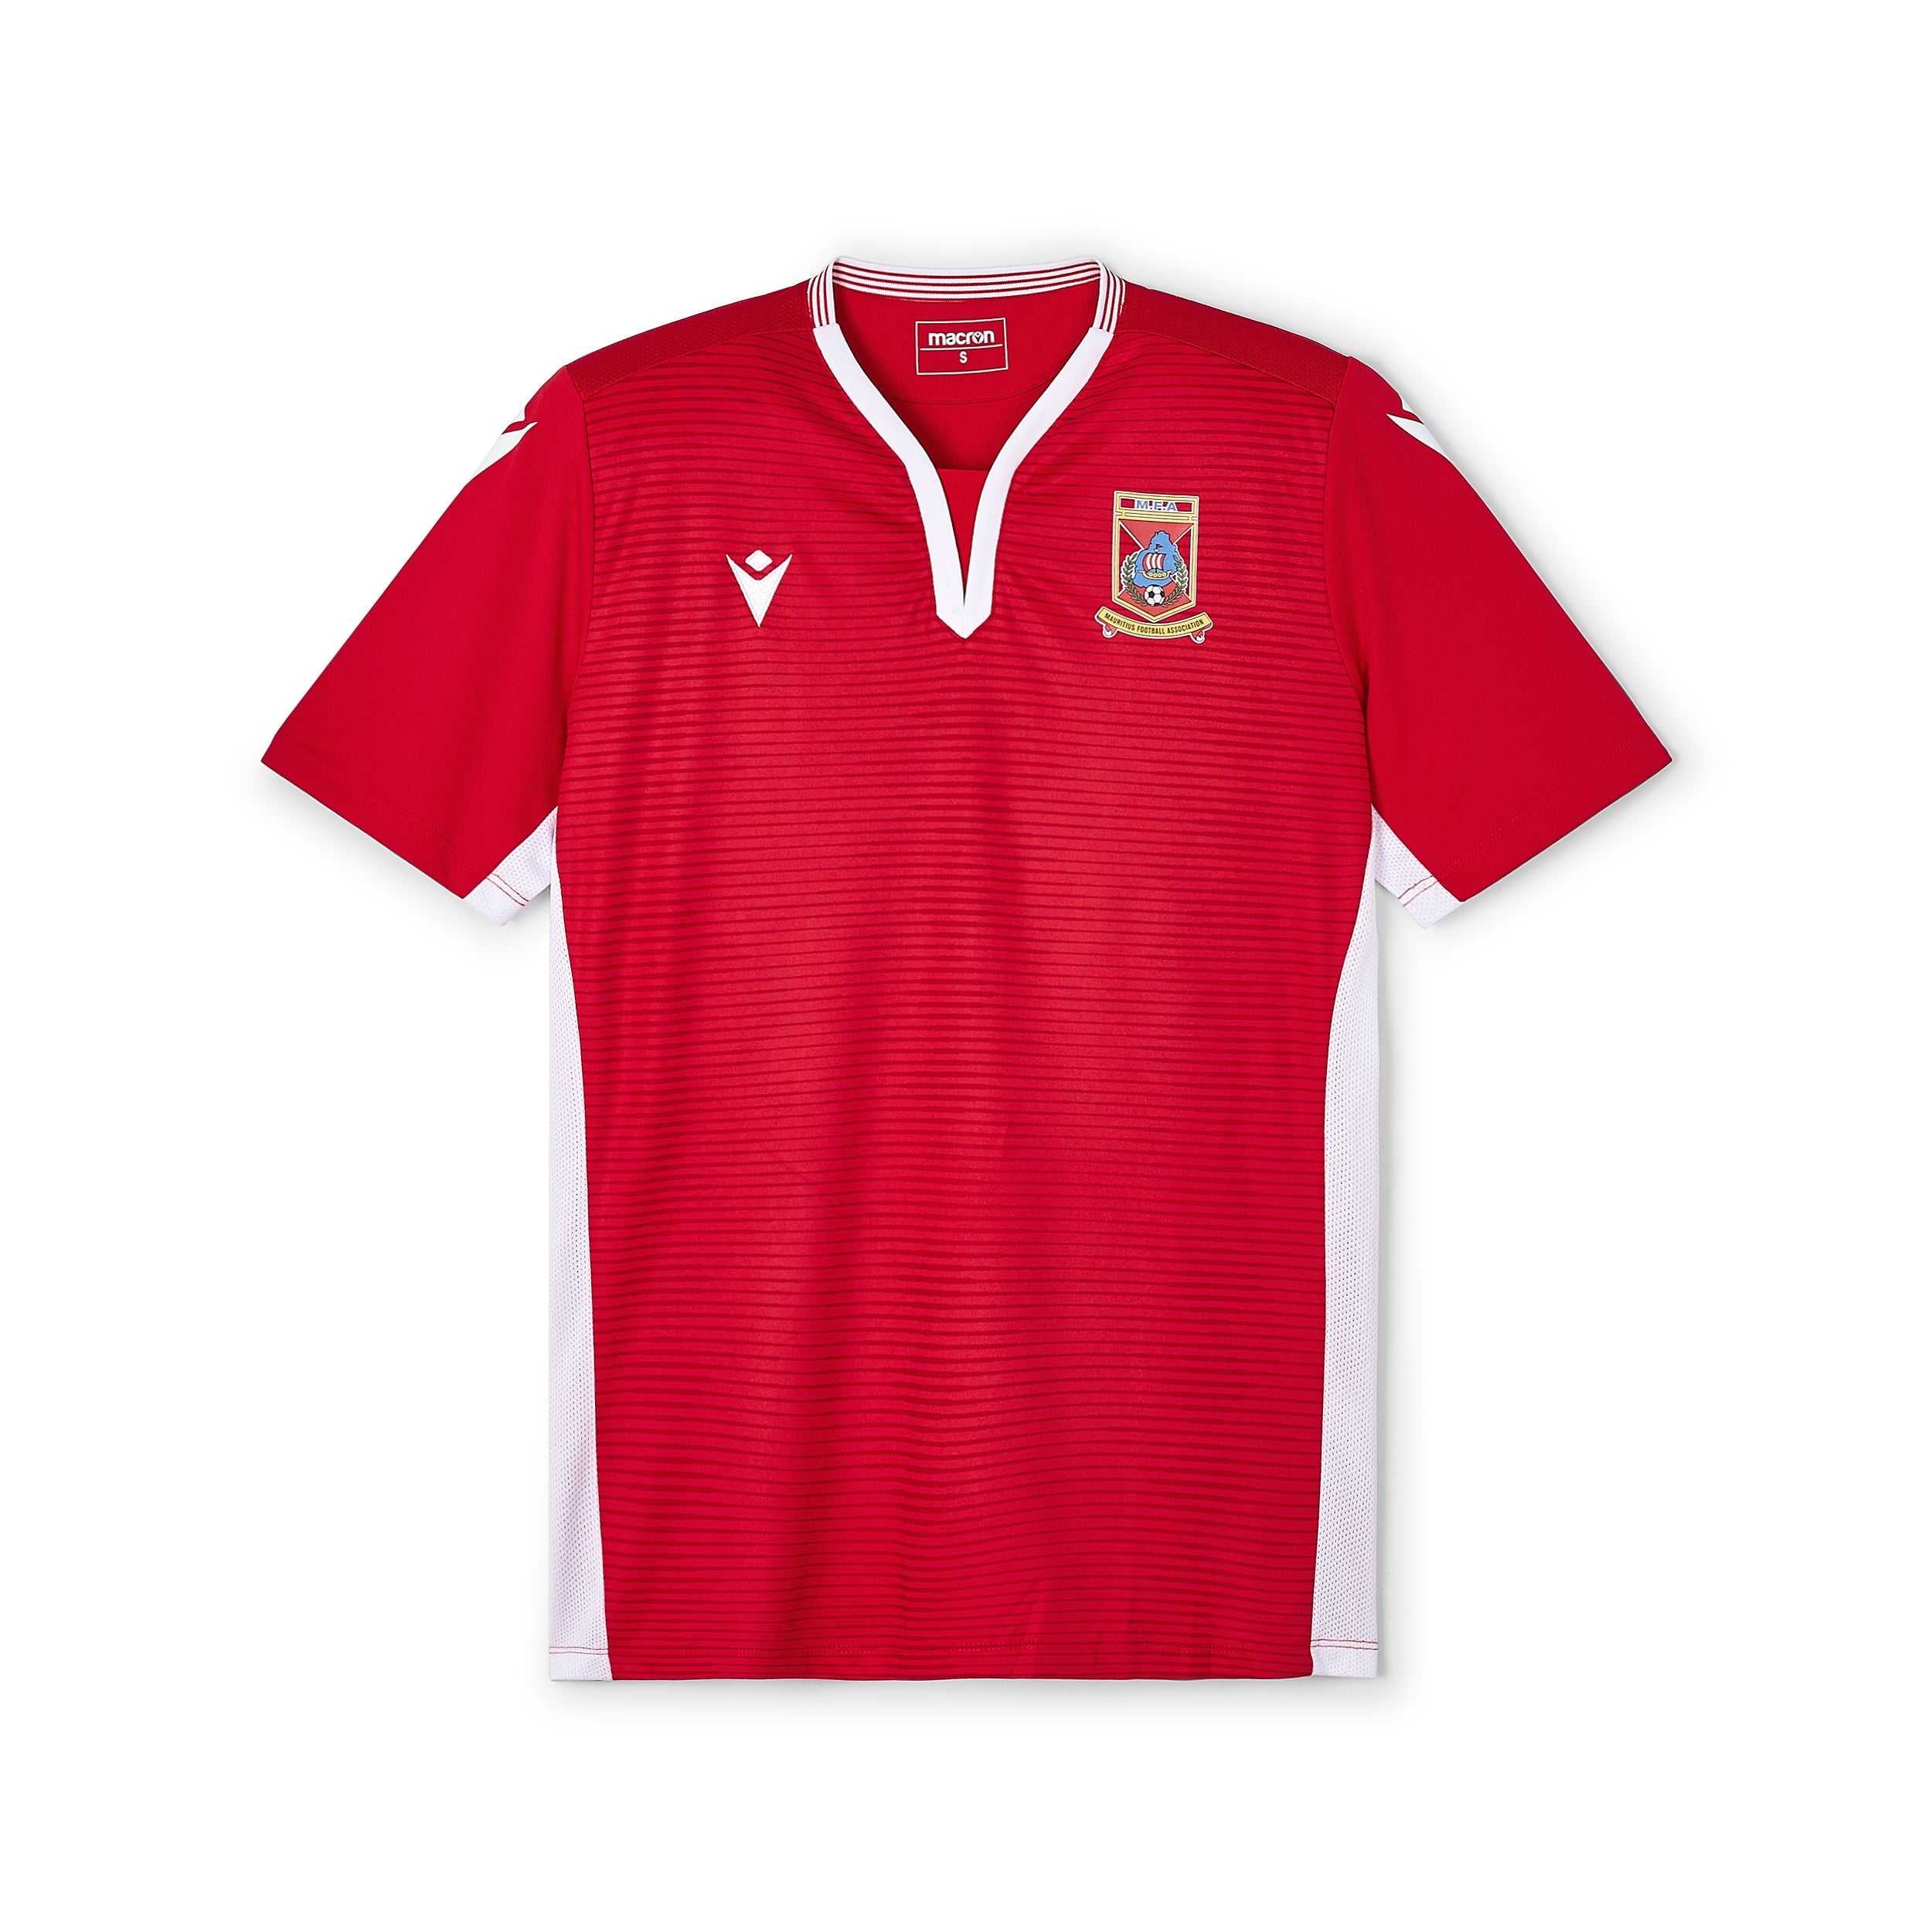 Mauritius Home Jersey - Mens